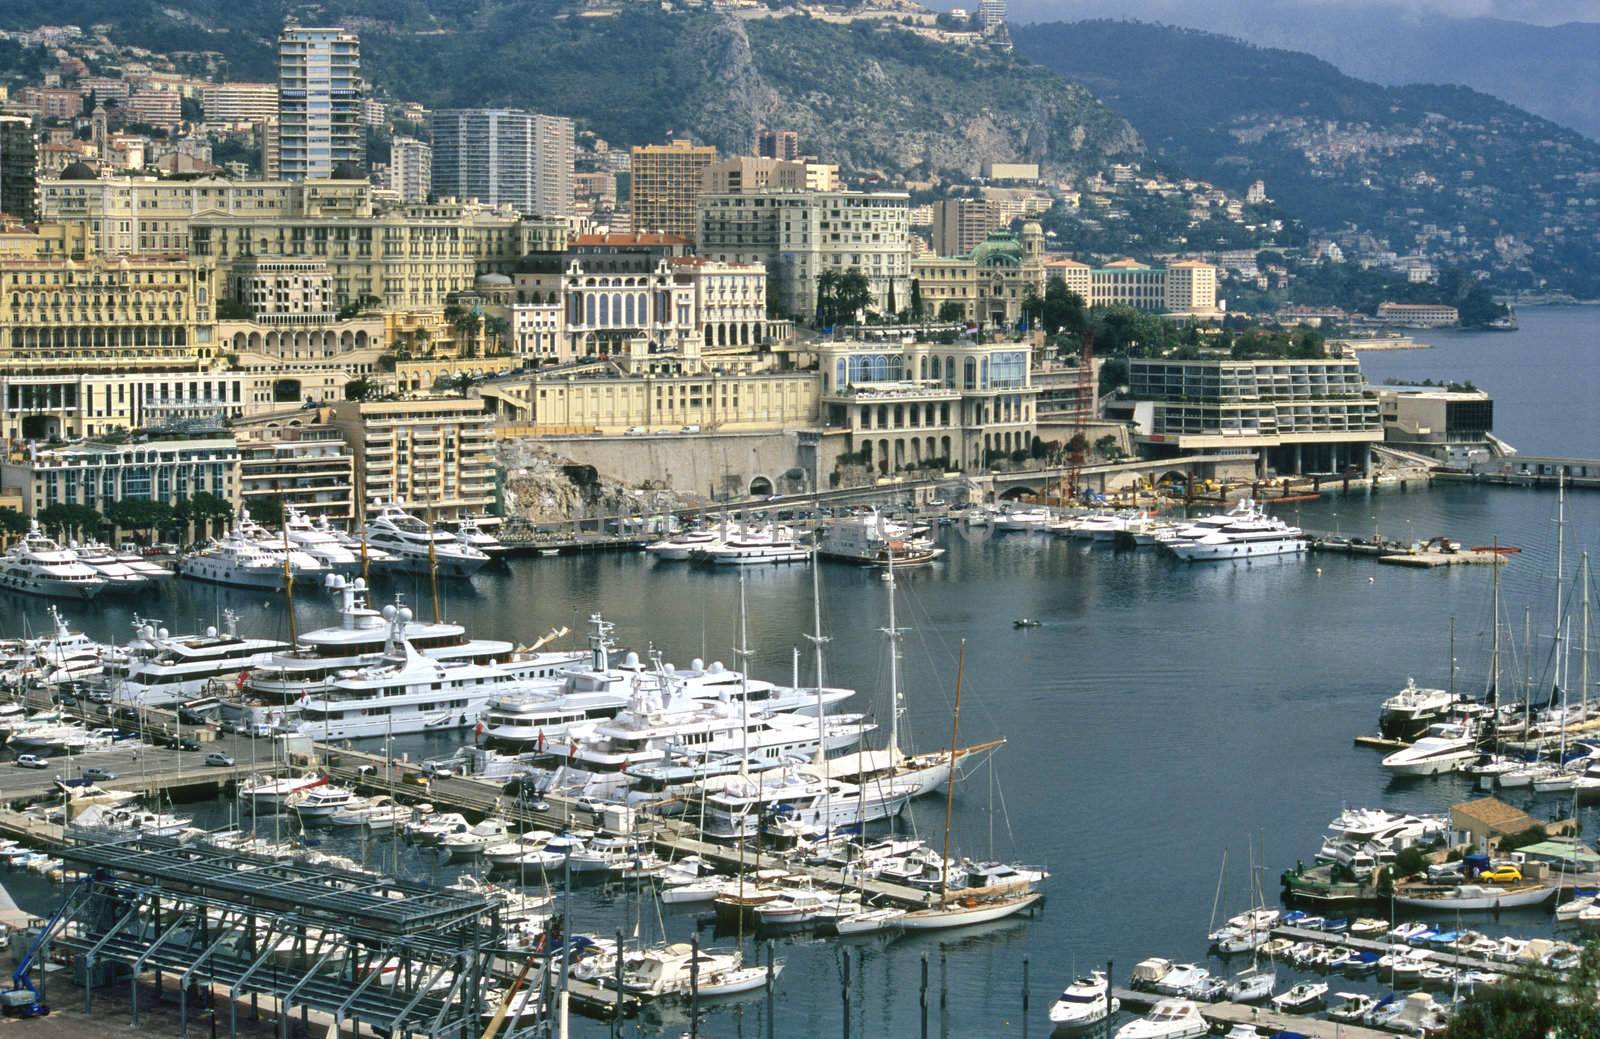 Luxury yachts dock in Monaco, home of the Monaco Grand Prix and the Monte Carlo Casino visible in the background.